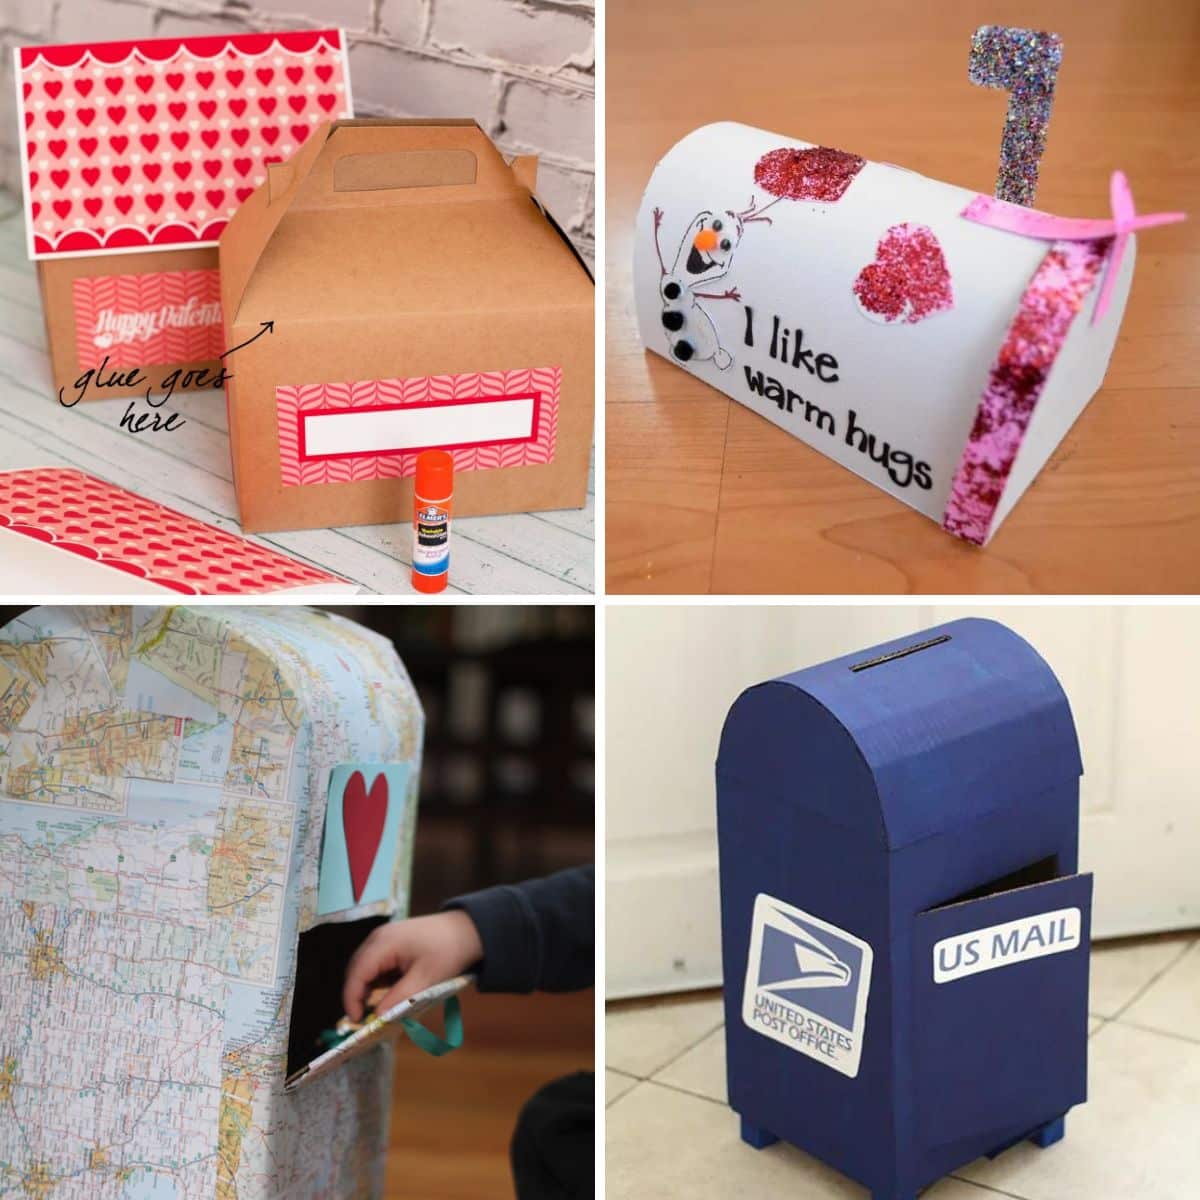 4 images of cutest mailboxes.